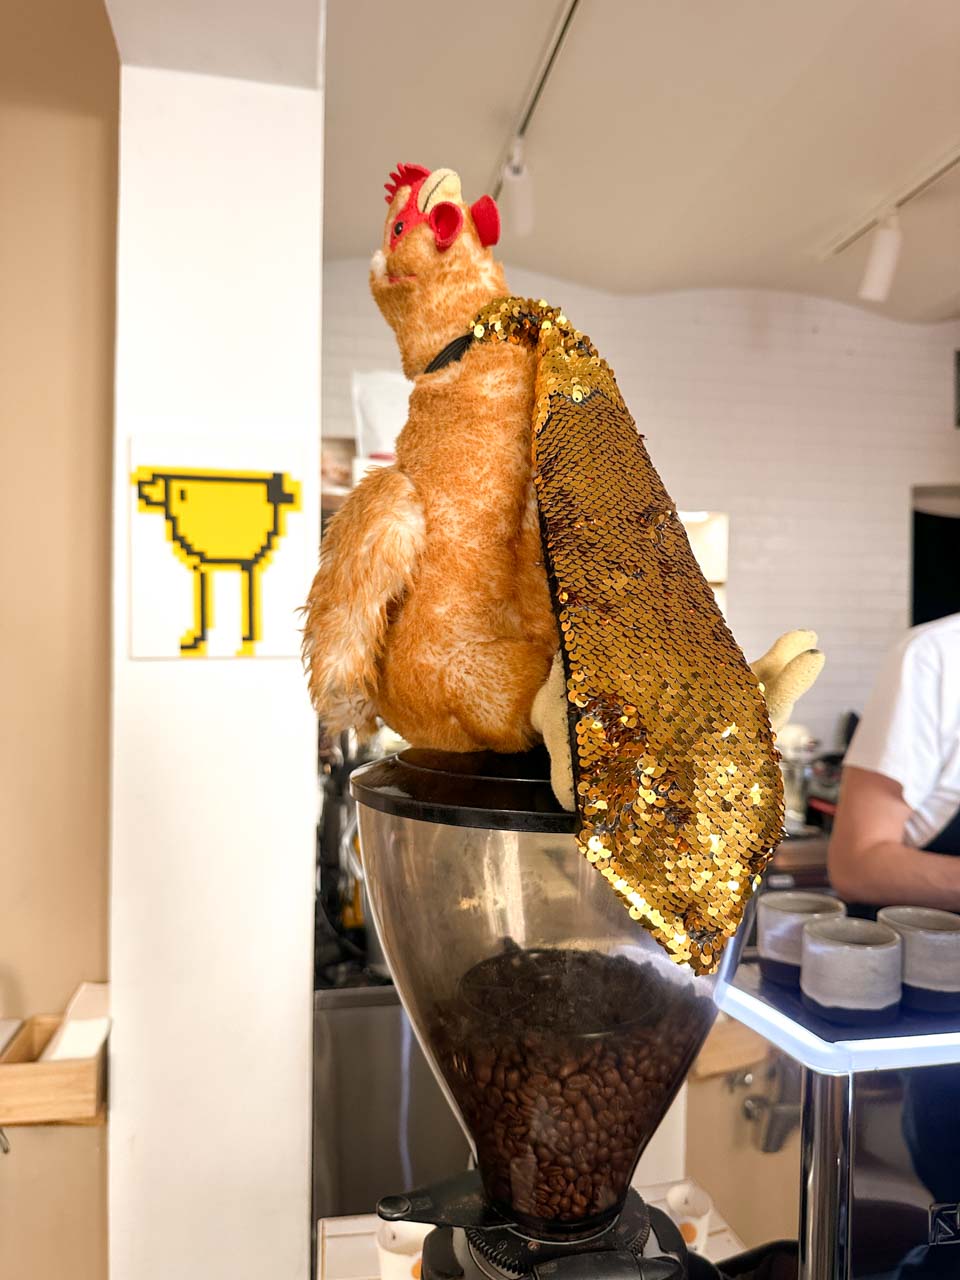 A plush chicken toy wearing a sequinned tie perched on a coffee grinder at Eggo Truck Brno